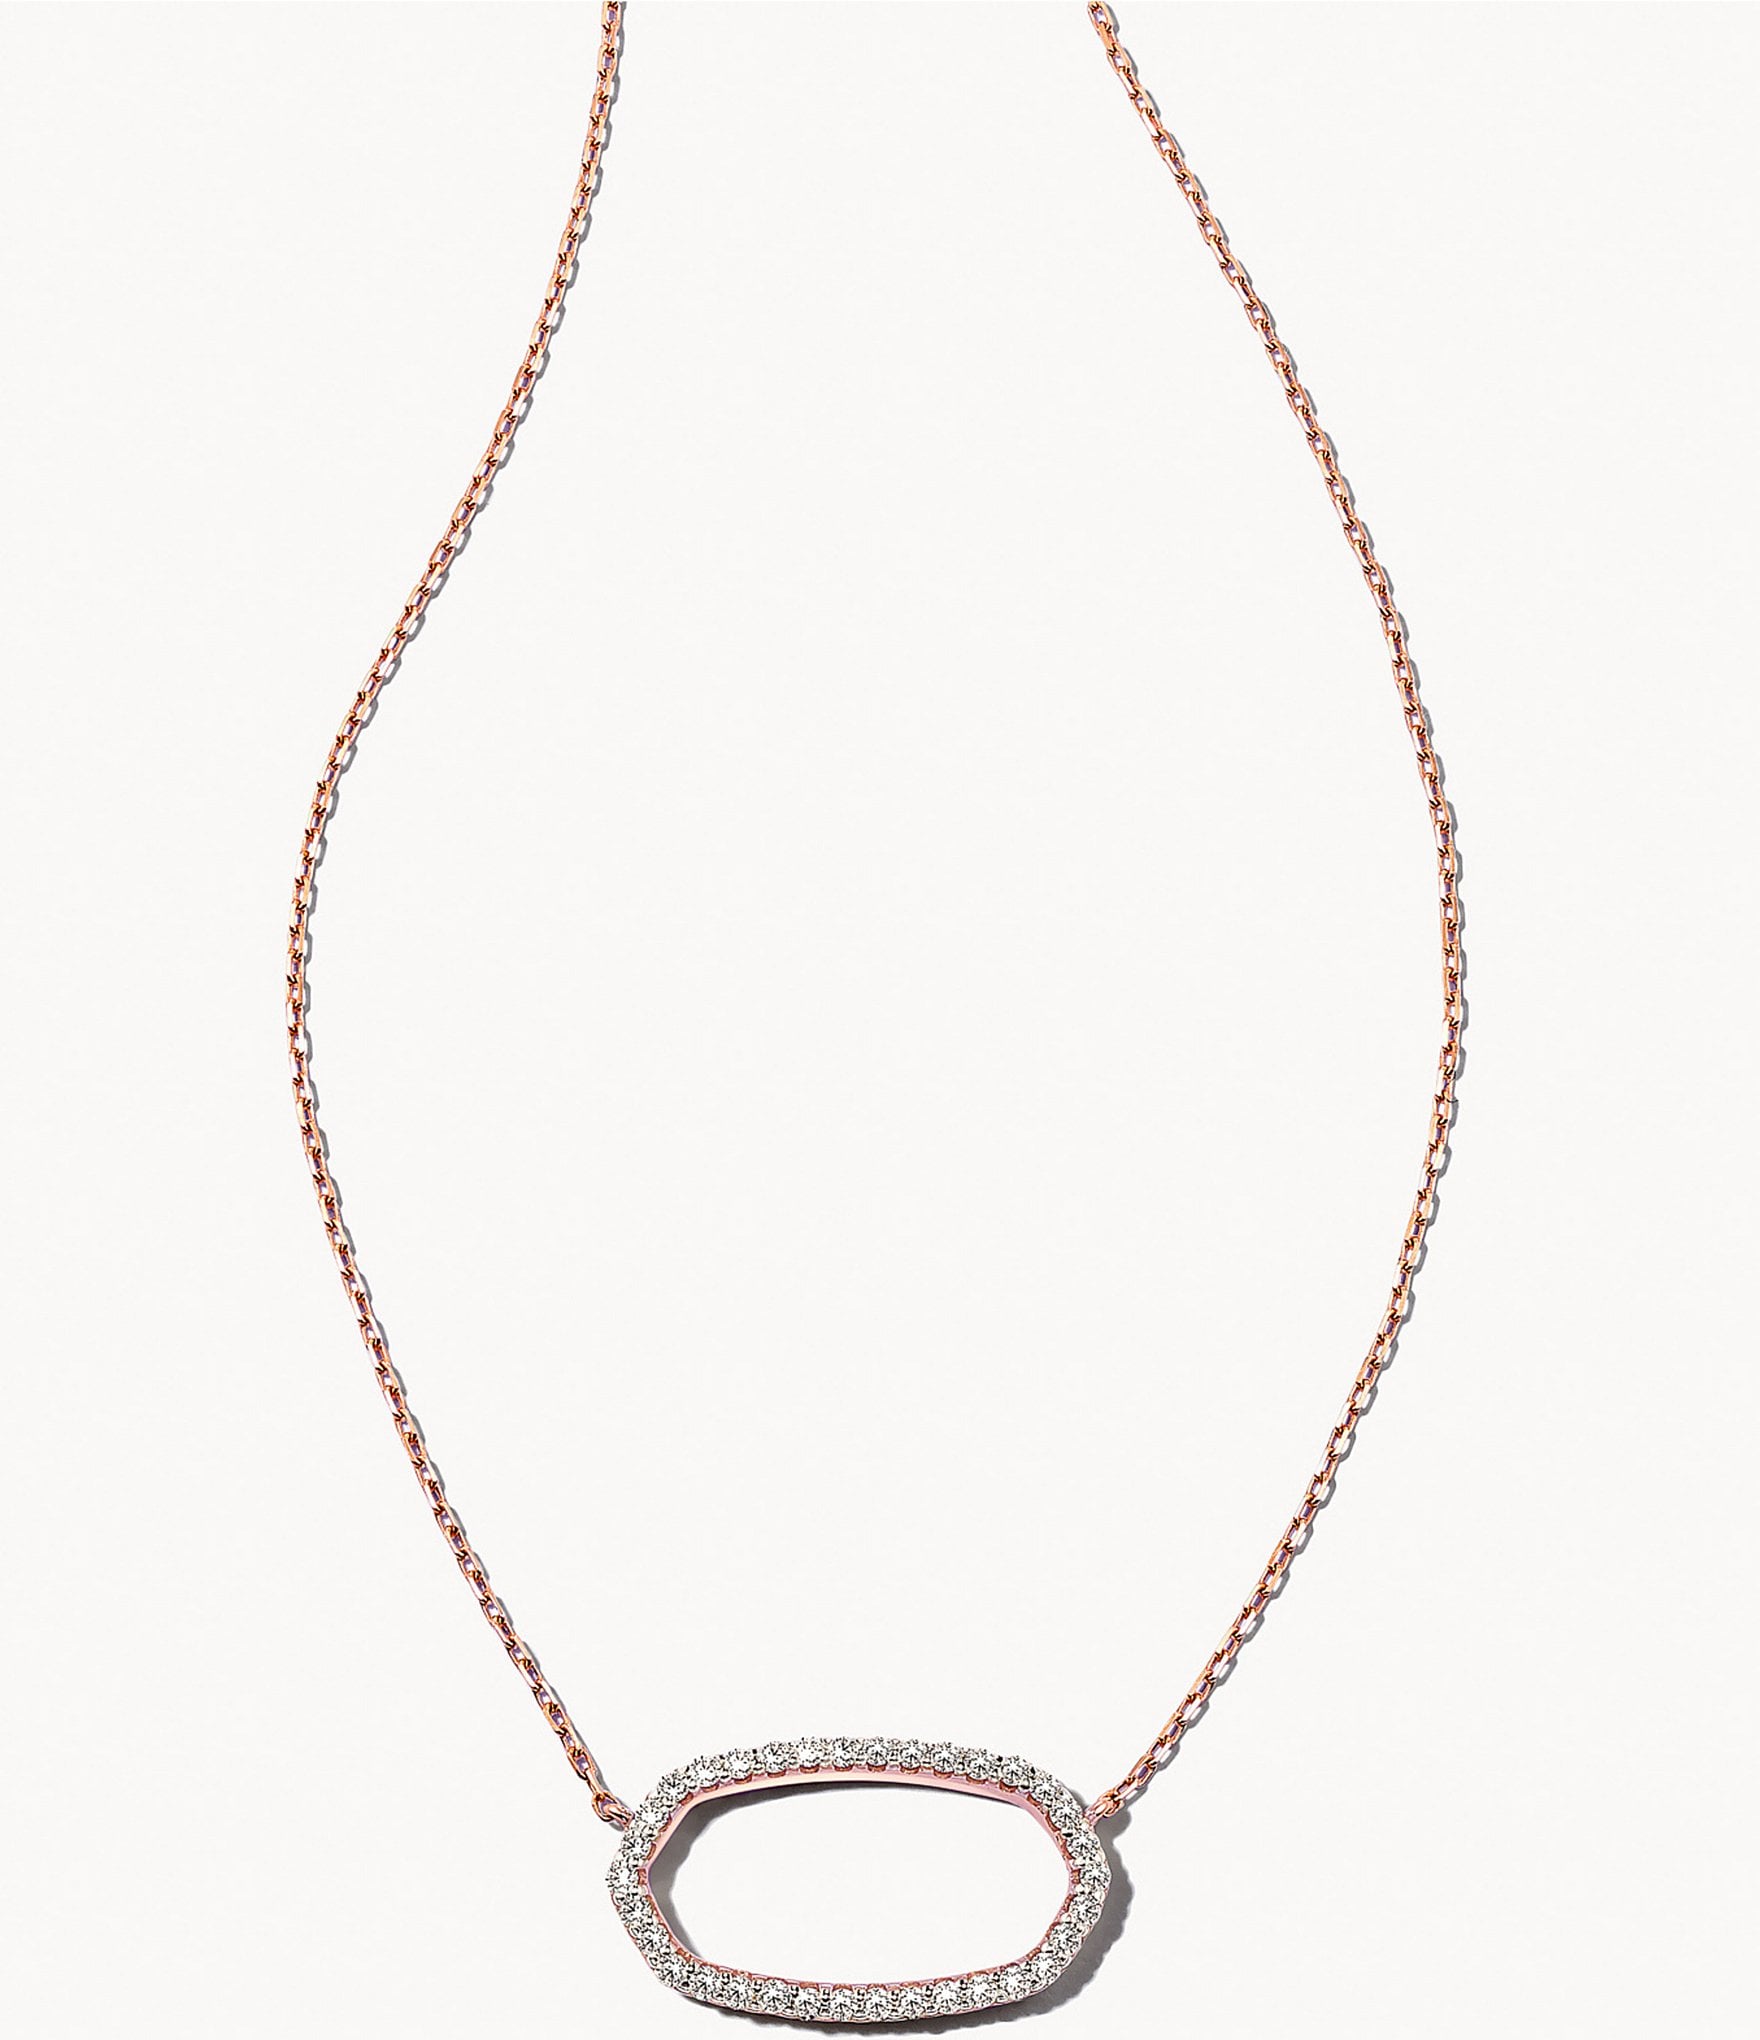 Aggregate more than 78 kendra scott necklace clasp super hot - POPPY